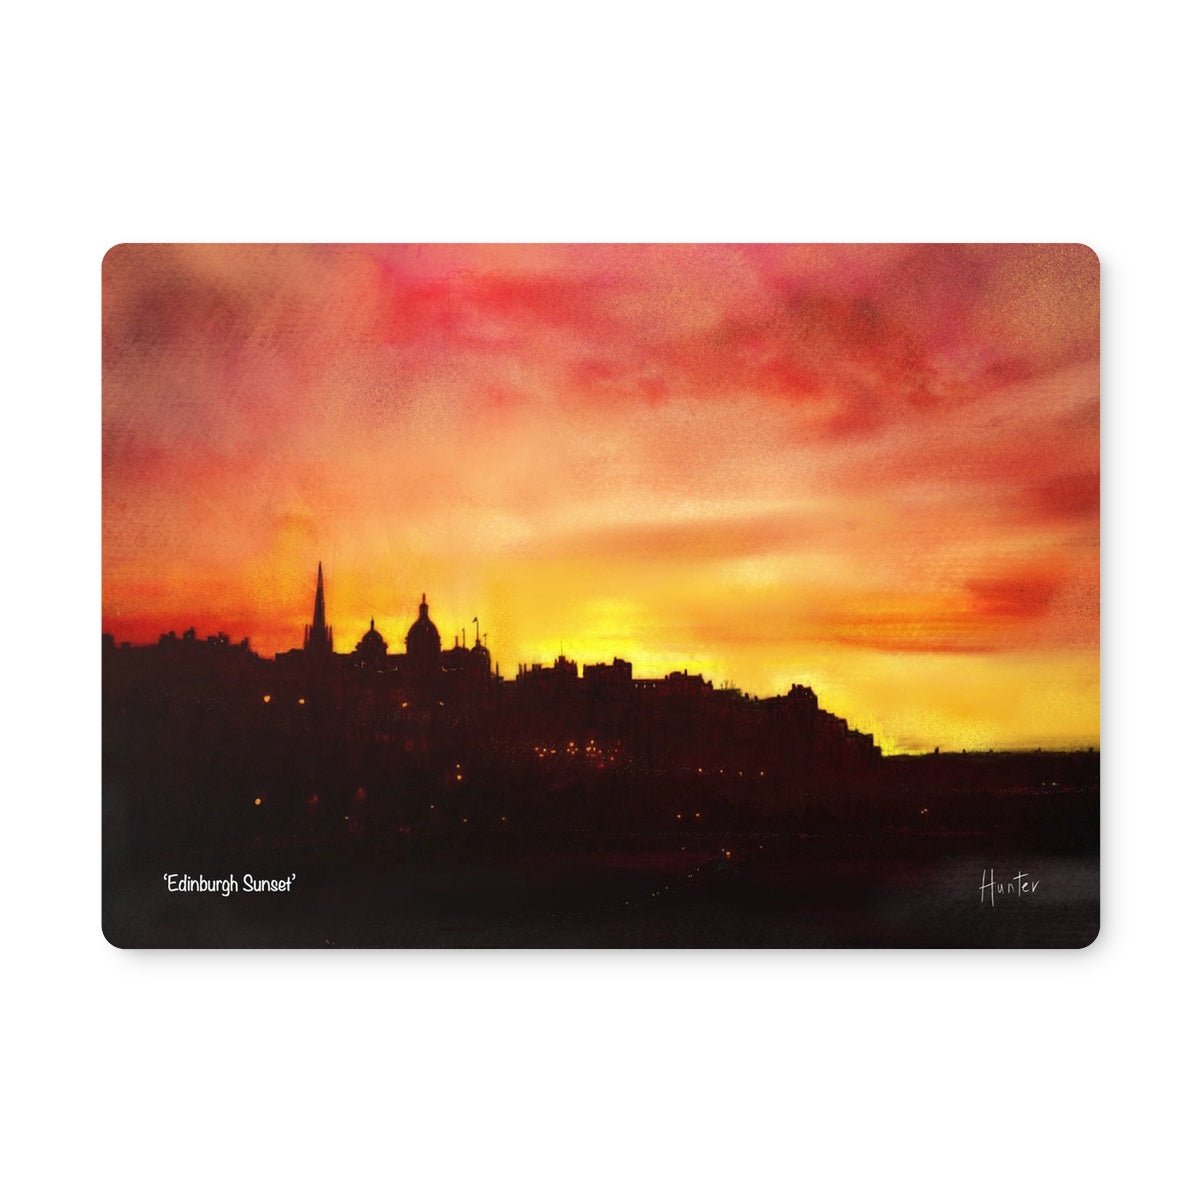 Edinburgh Sunset Art Gifts Placemat-Placemats-Edinburgh & Glasgow Art Gallery-2 Placemats-Paintings, Prints, Homeware, Art Gifts From Scotland By Scottish Artist Kevin Hunter